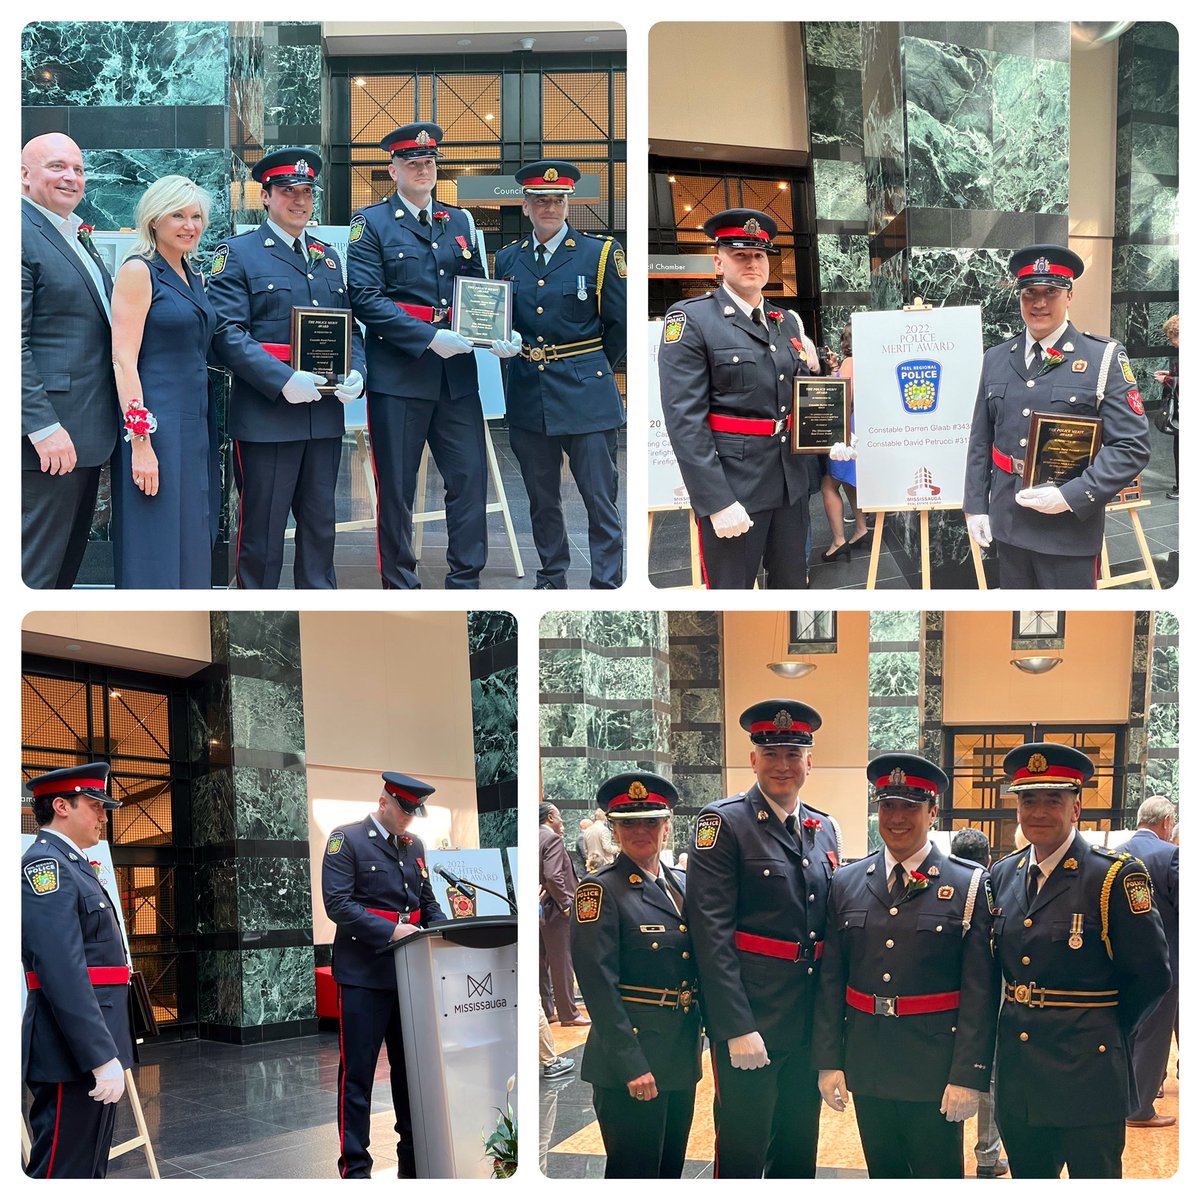 Congratulations and thank you to @PeelPolice Cst.Glabb & Cst.Petrucci. 

Tonight they were awarded the @MREBRealtors Police Merit Award for rescuing a trapped man from a burning car. #PolicingExcellence.